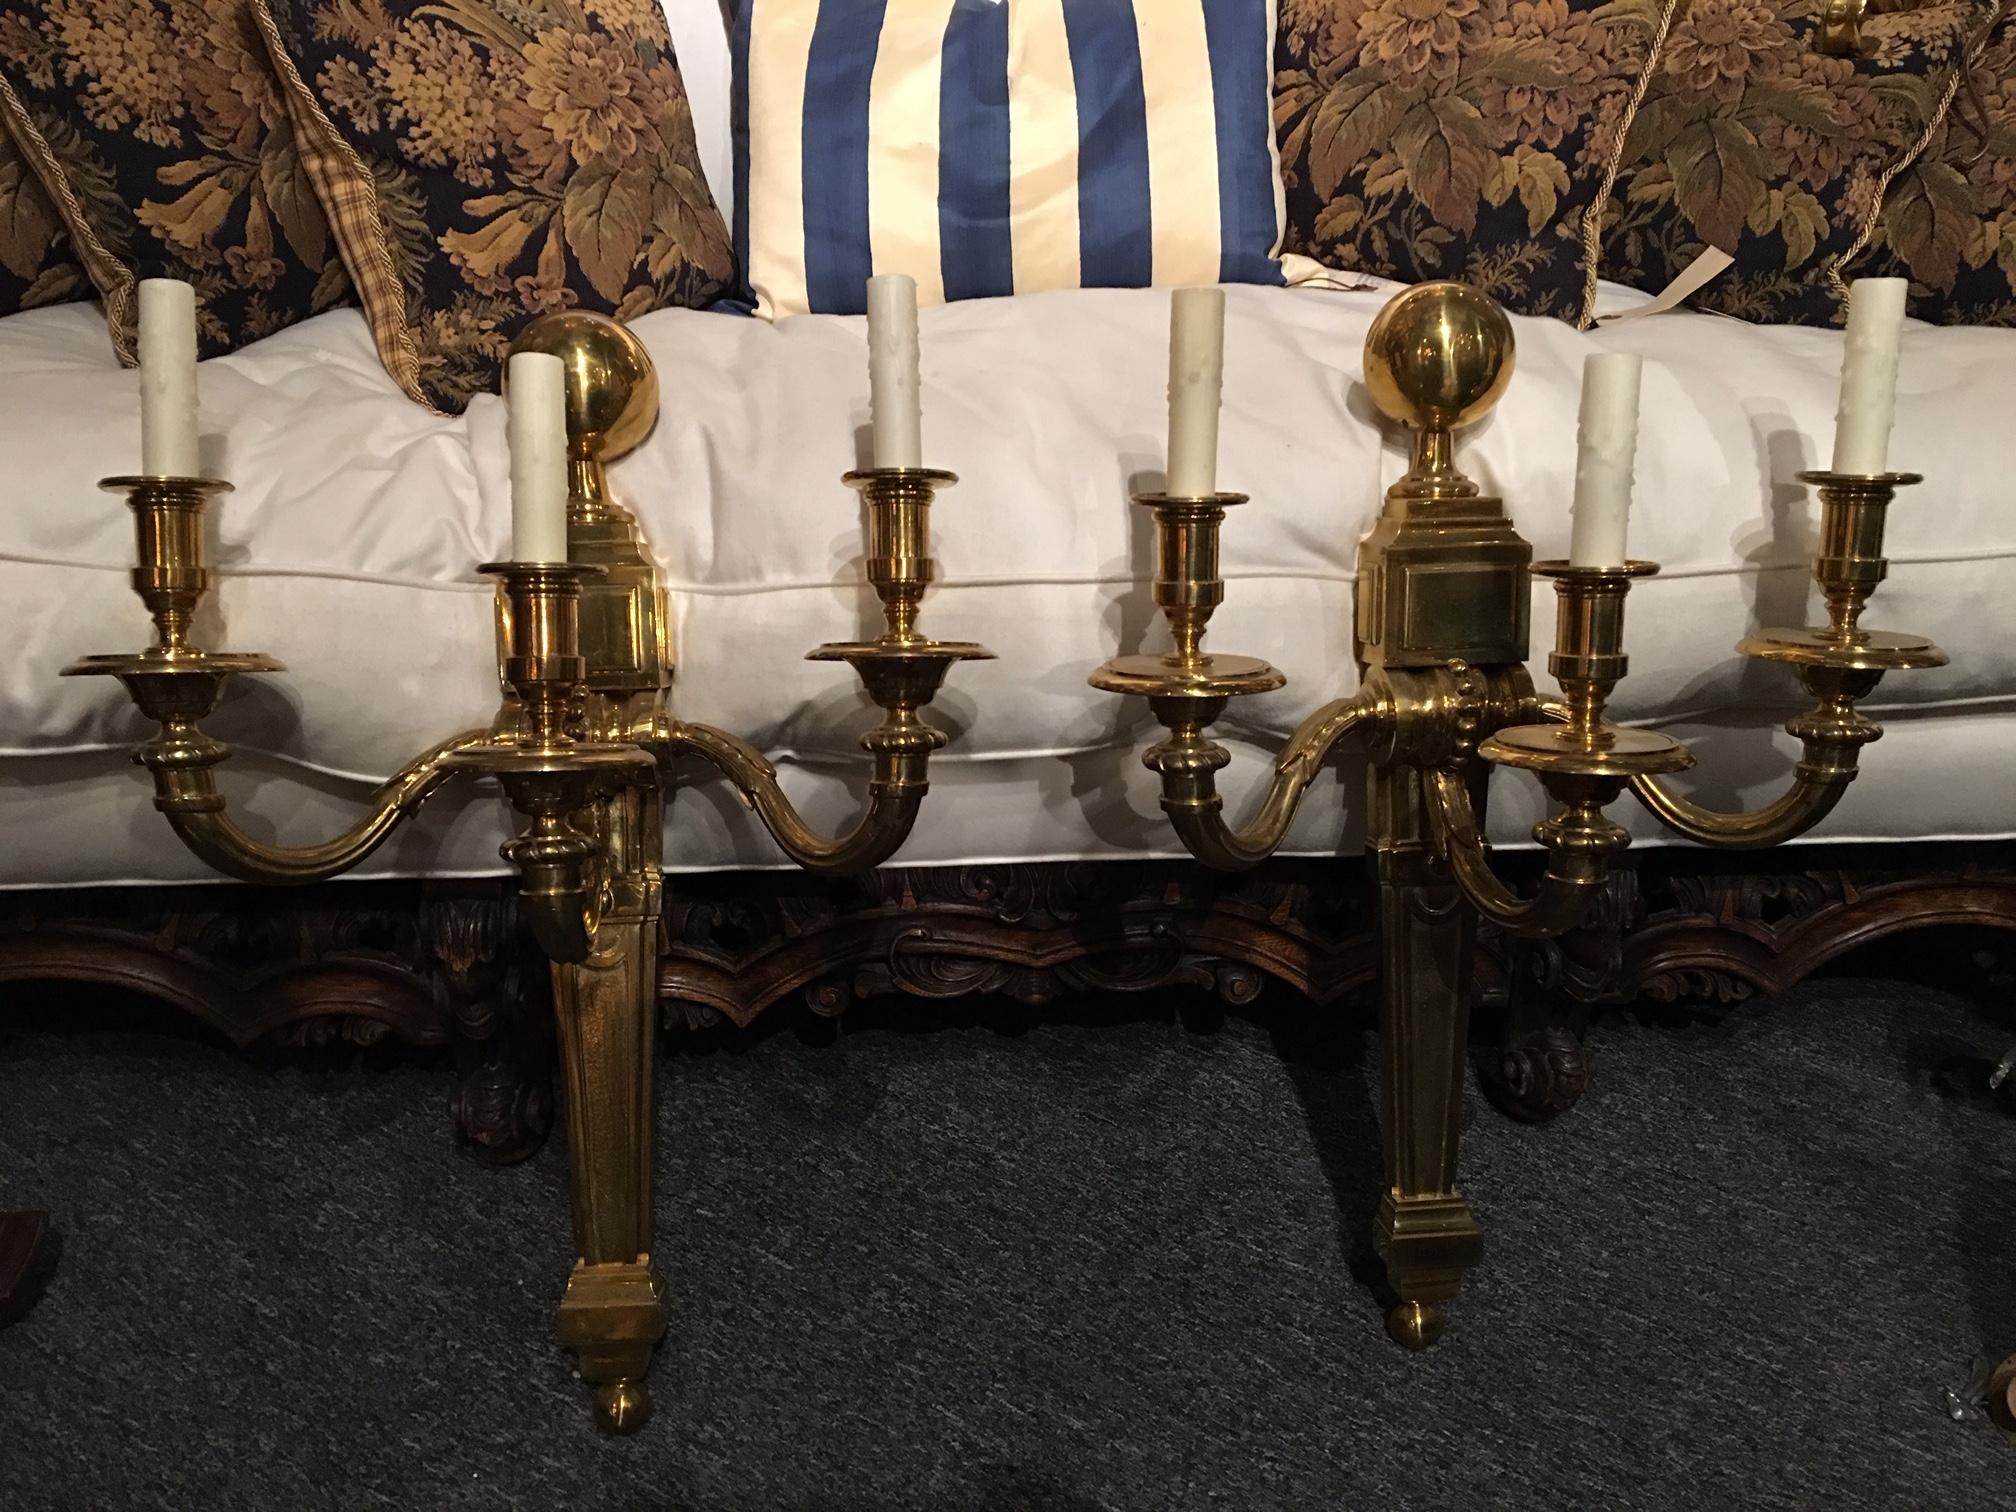 Large American polished brass three-light American sconces, early 20th century.